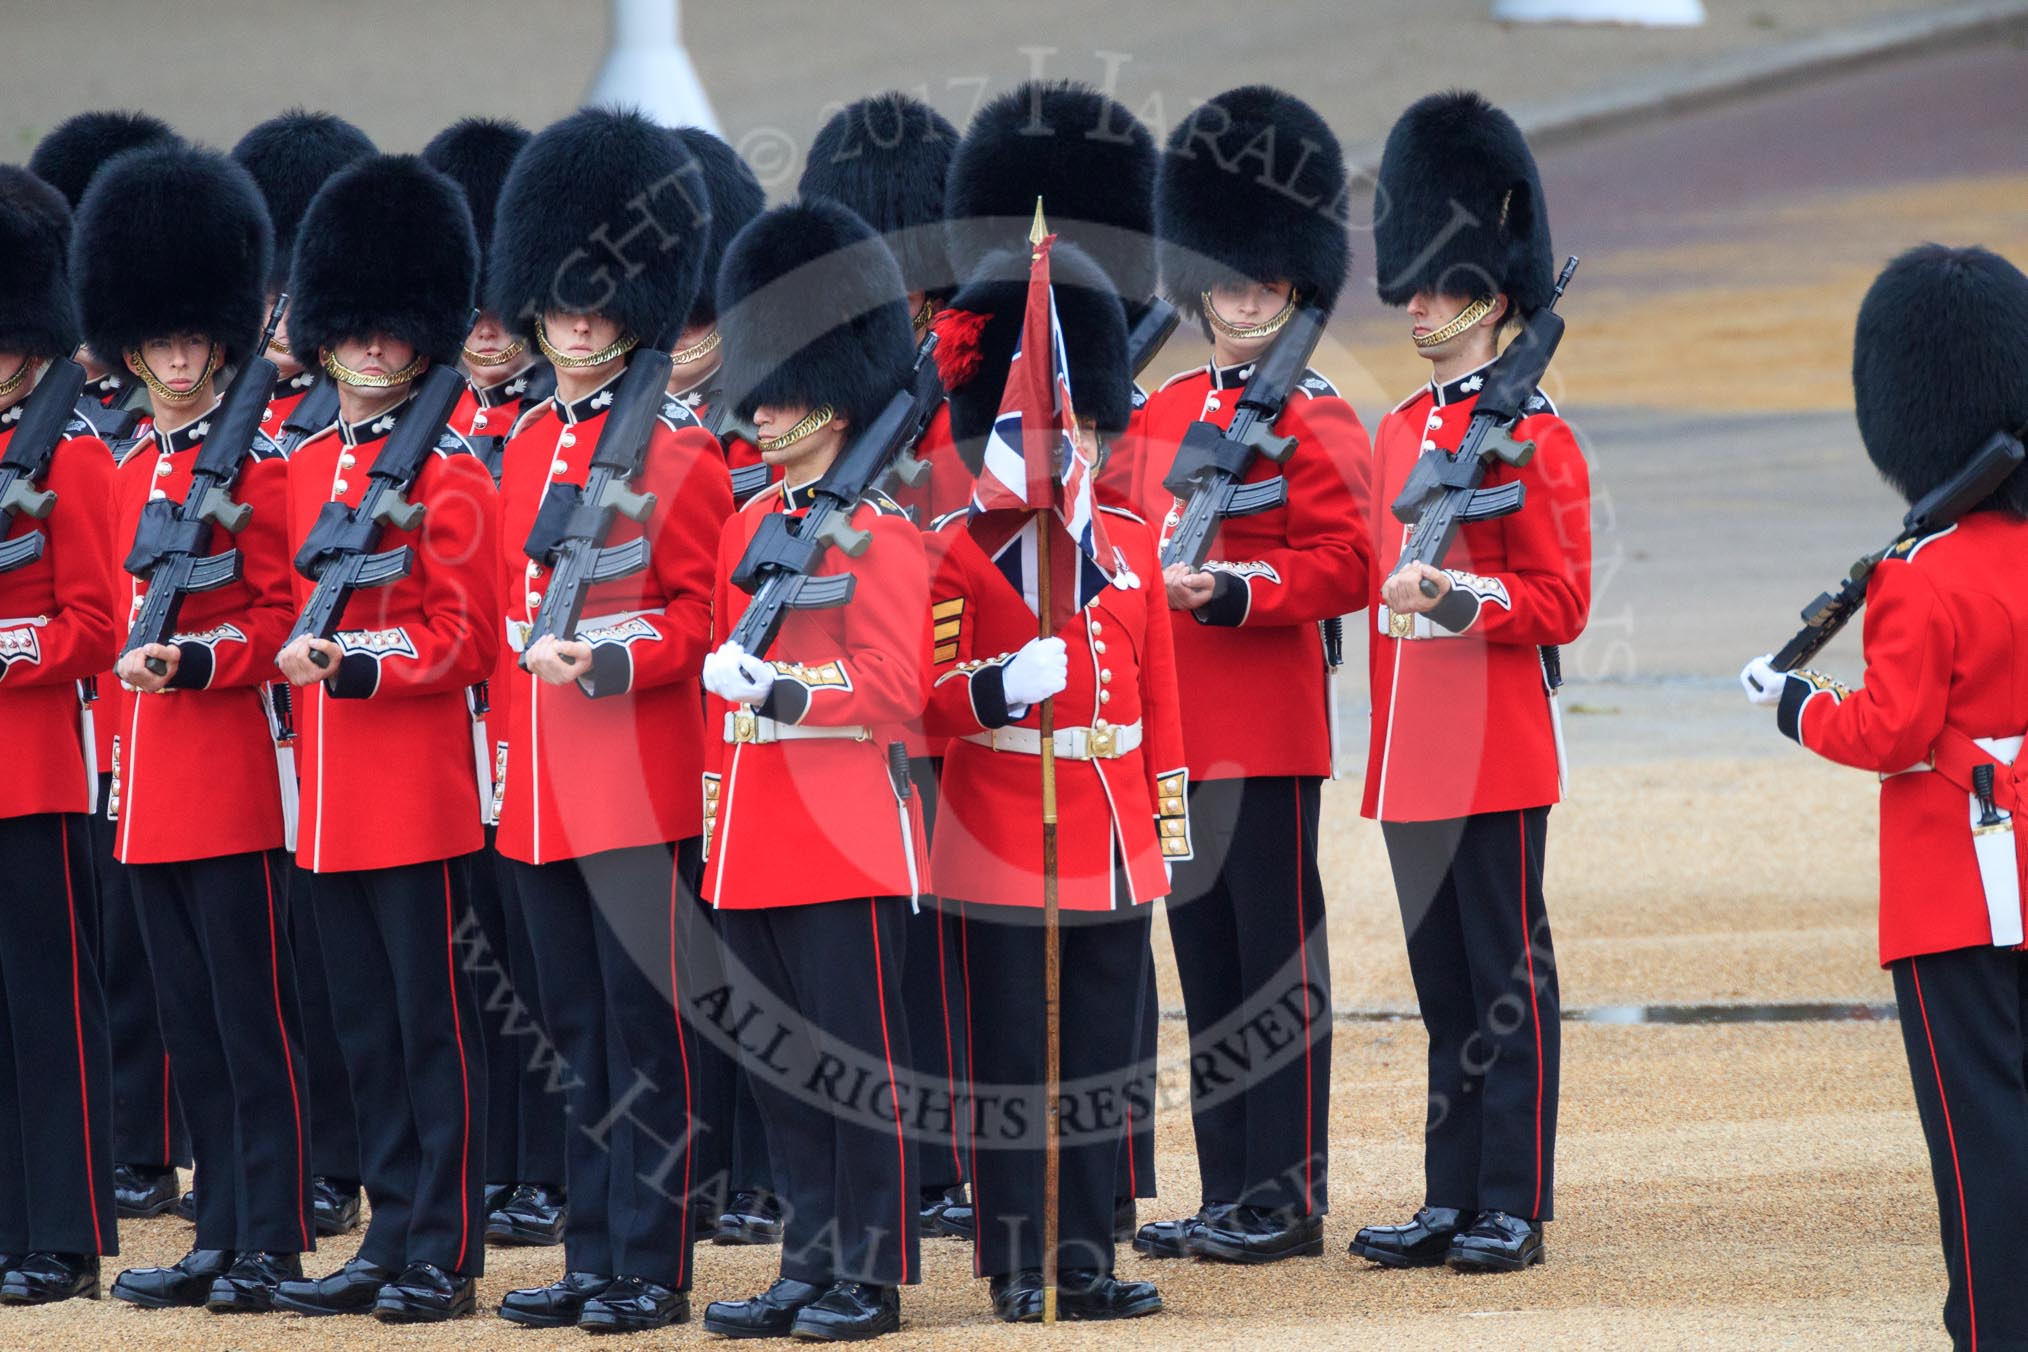 during The Colonel's Review {iptcyear4} (final rehearsal for Trooping the Colour, The Queen's Birthday Parade)  at Horse Guards Parade, Westminster, London, 2 June 2018, 10:27.